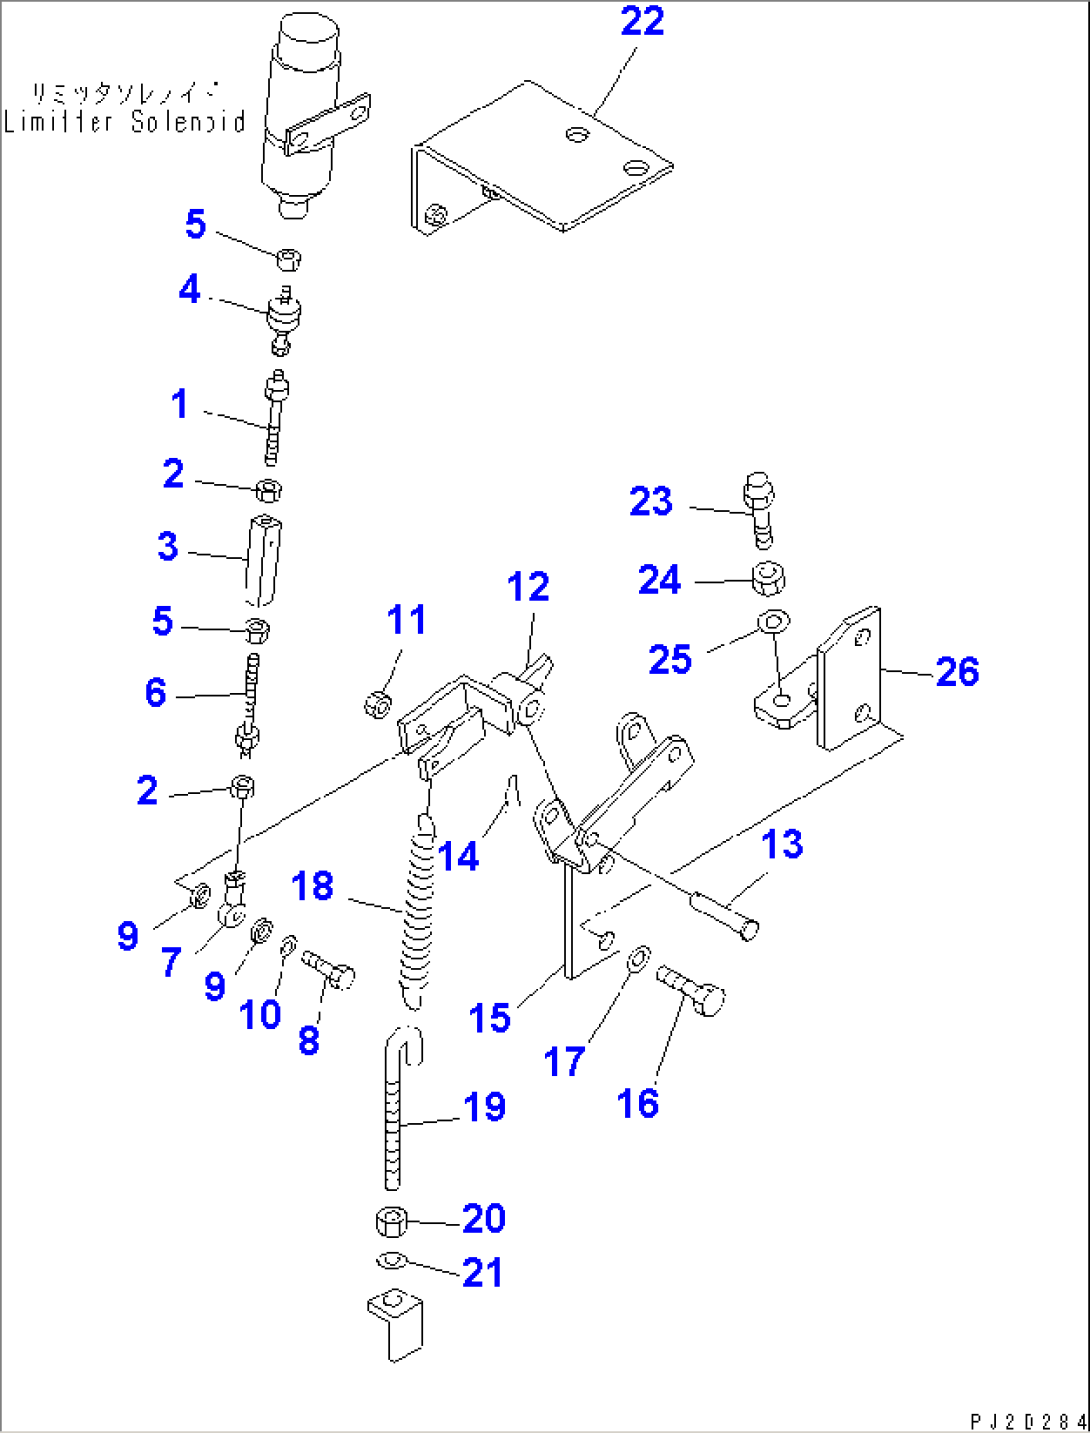 SPEED LIMITTER SOLENOID RELATED PARTS(#7044-)